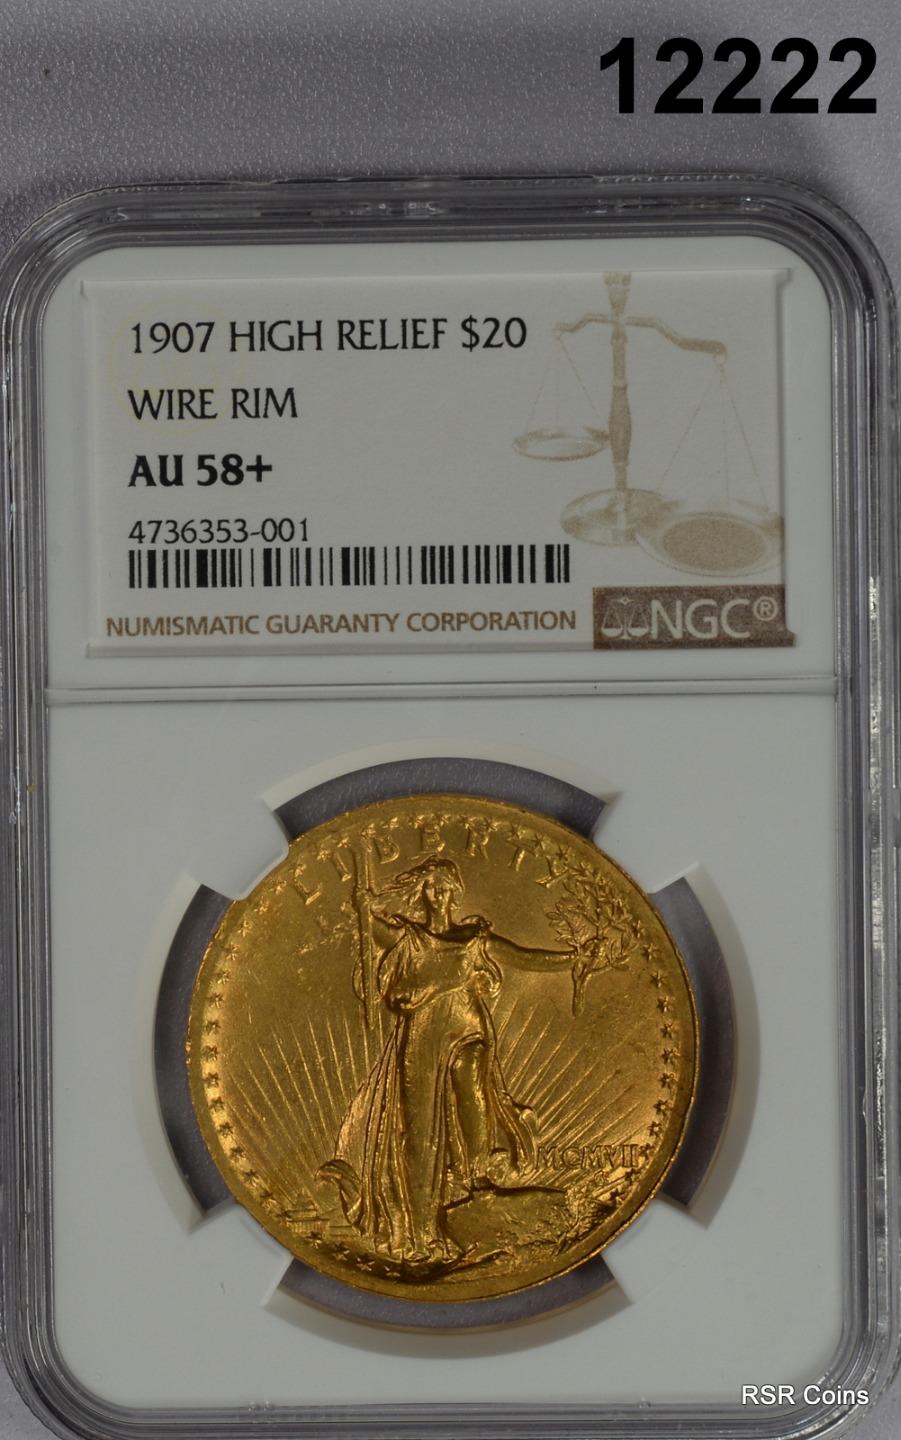 1907 $20 HIGH RELIEF ST. GAUDENS GOLD WIRE EDGE NGC CERTIFIED AU58+ RARE! #12222